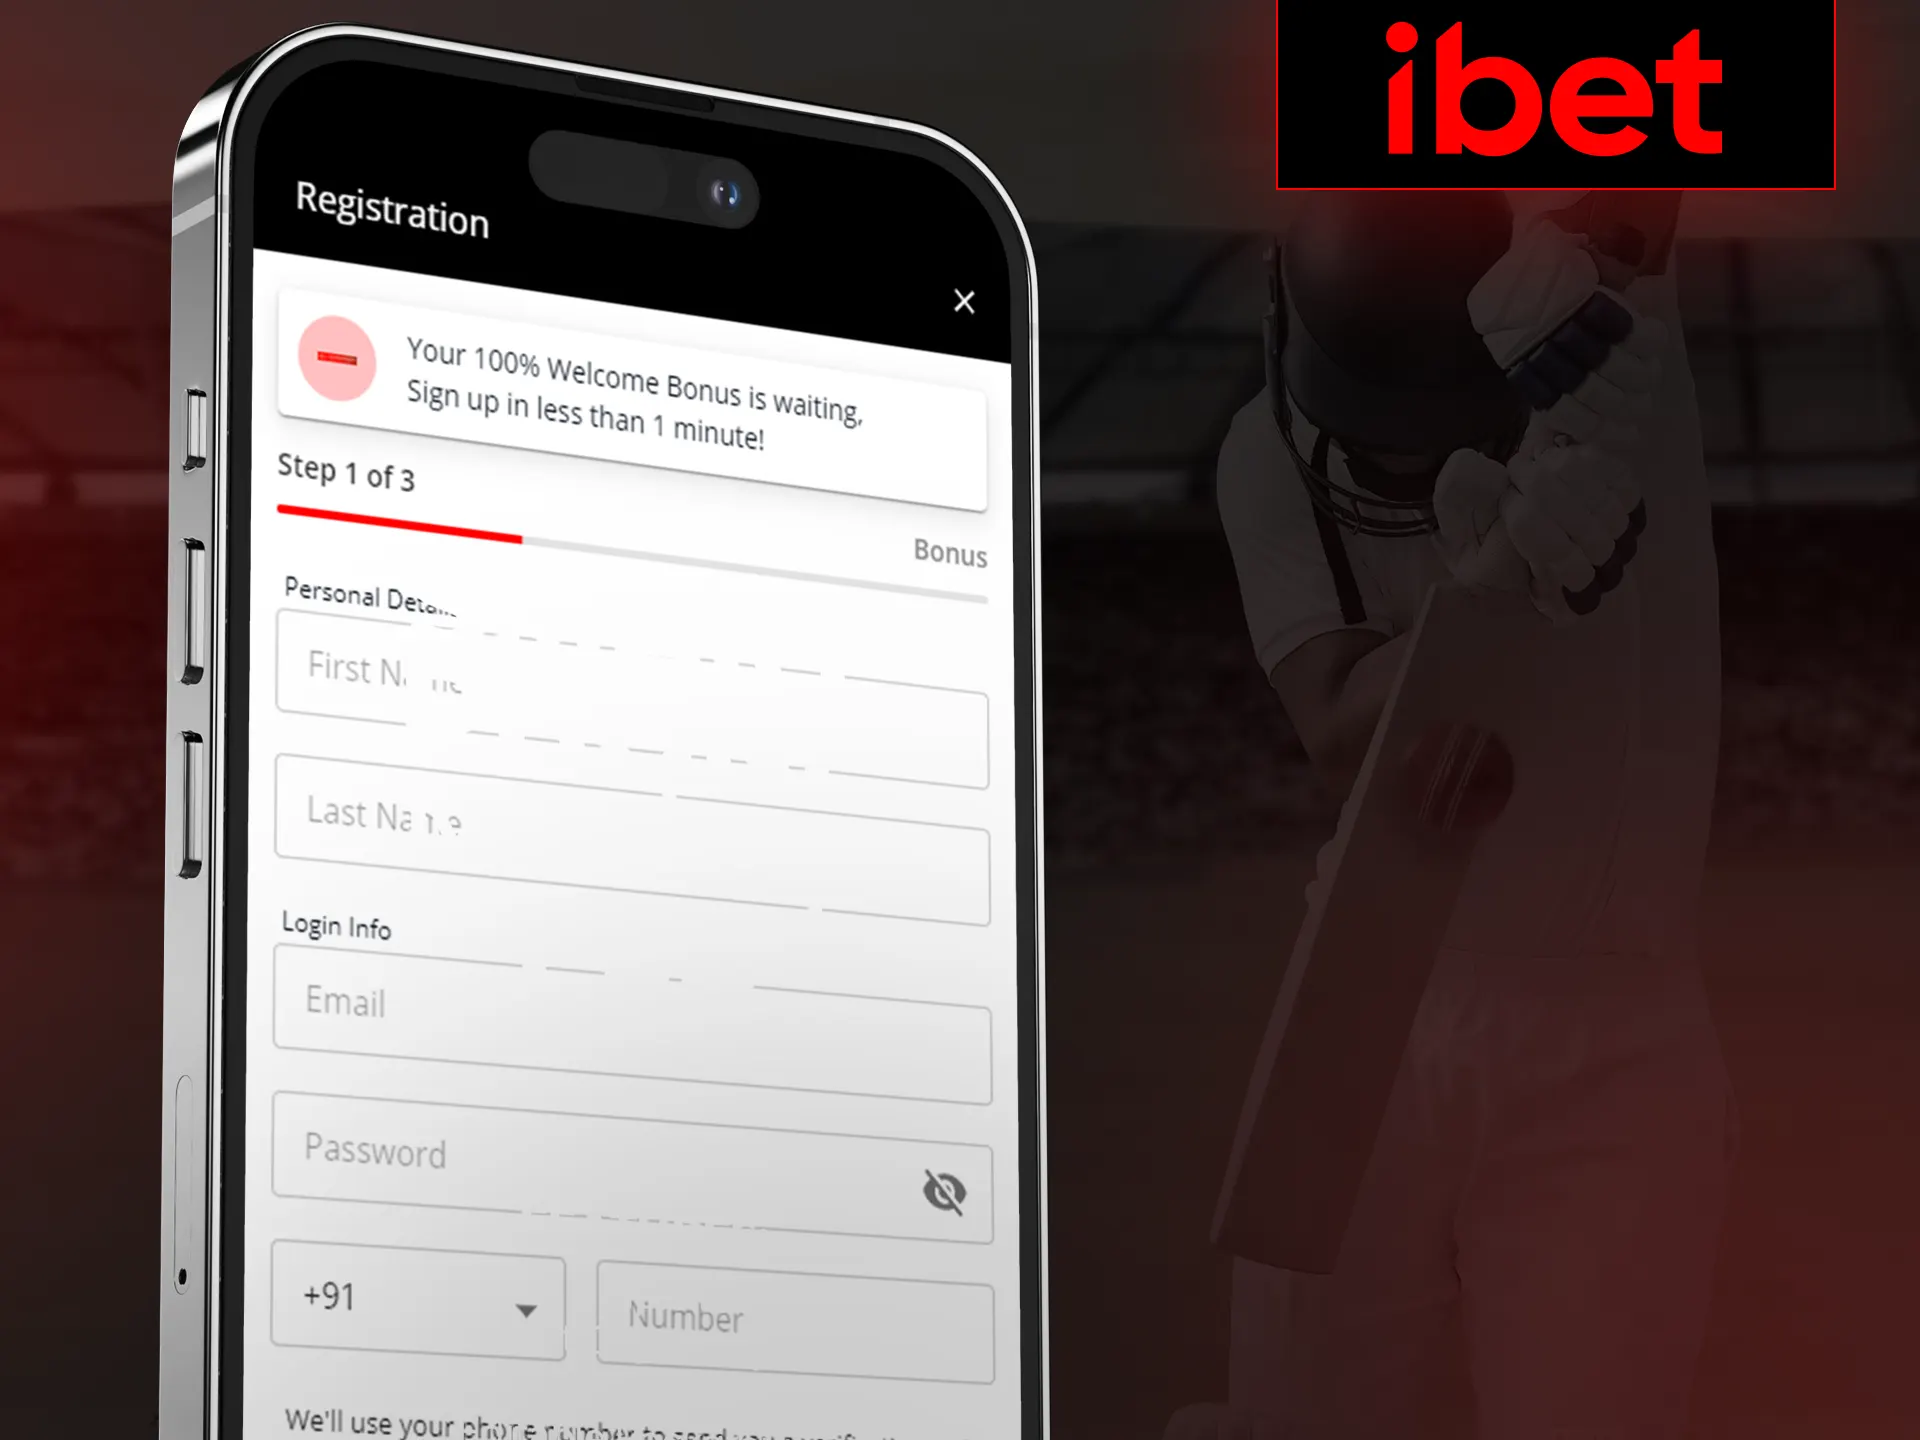 Sign up at iBet and get a welcome bonus.